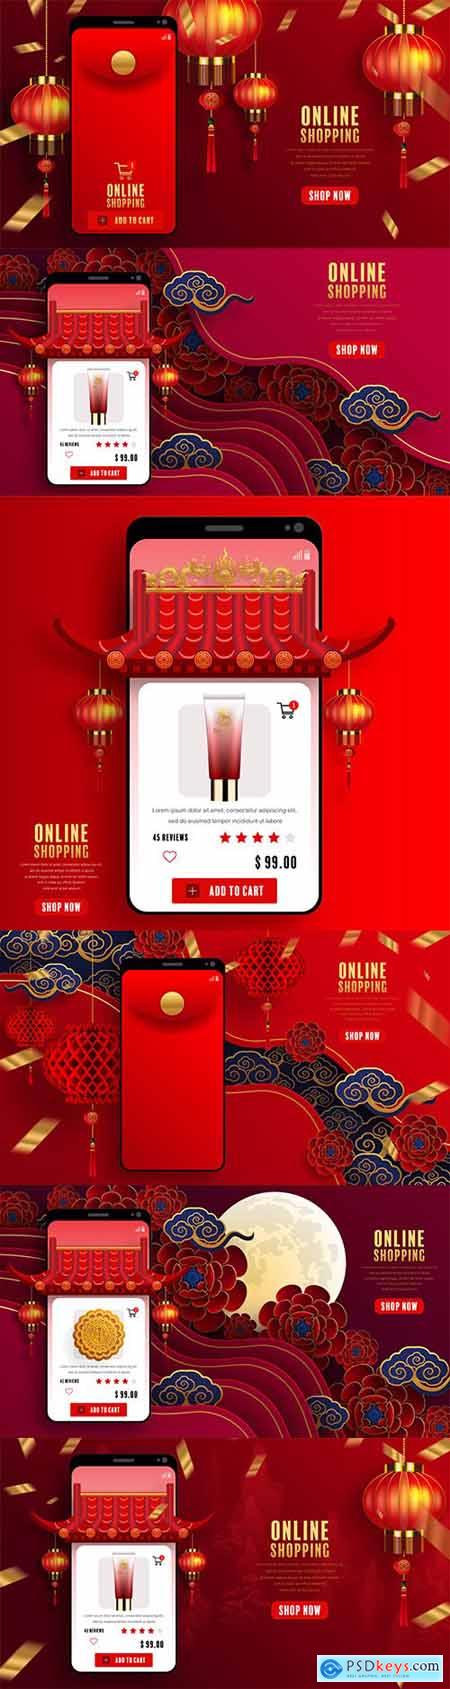 Online digital marketing store in mobile app Chinese background